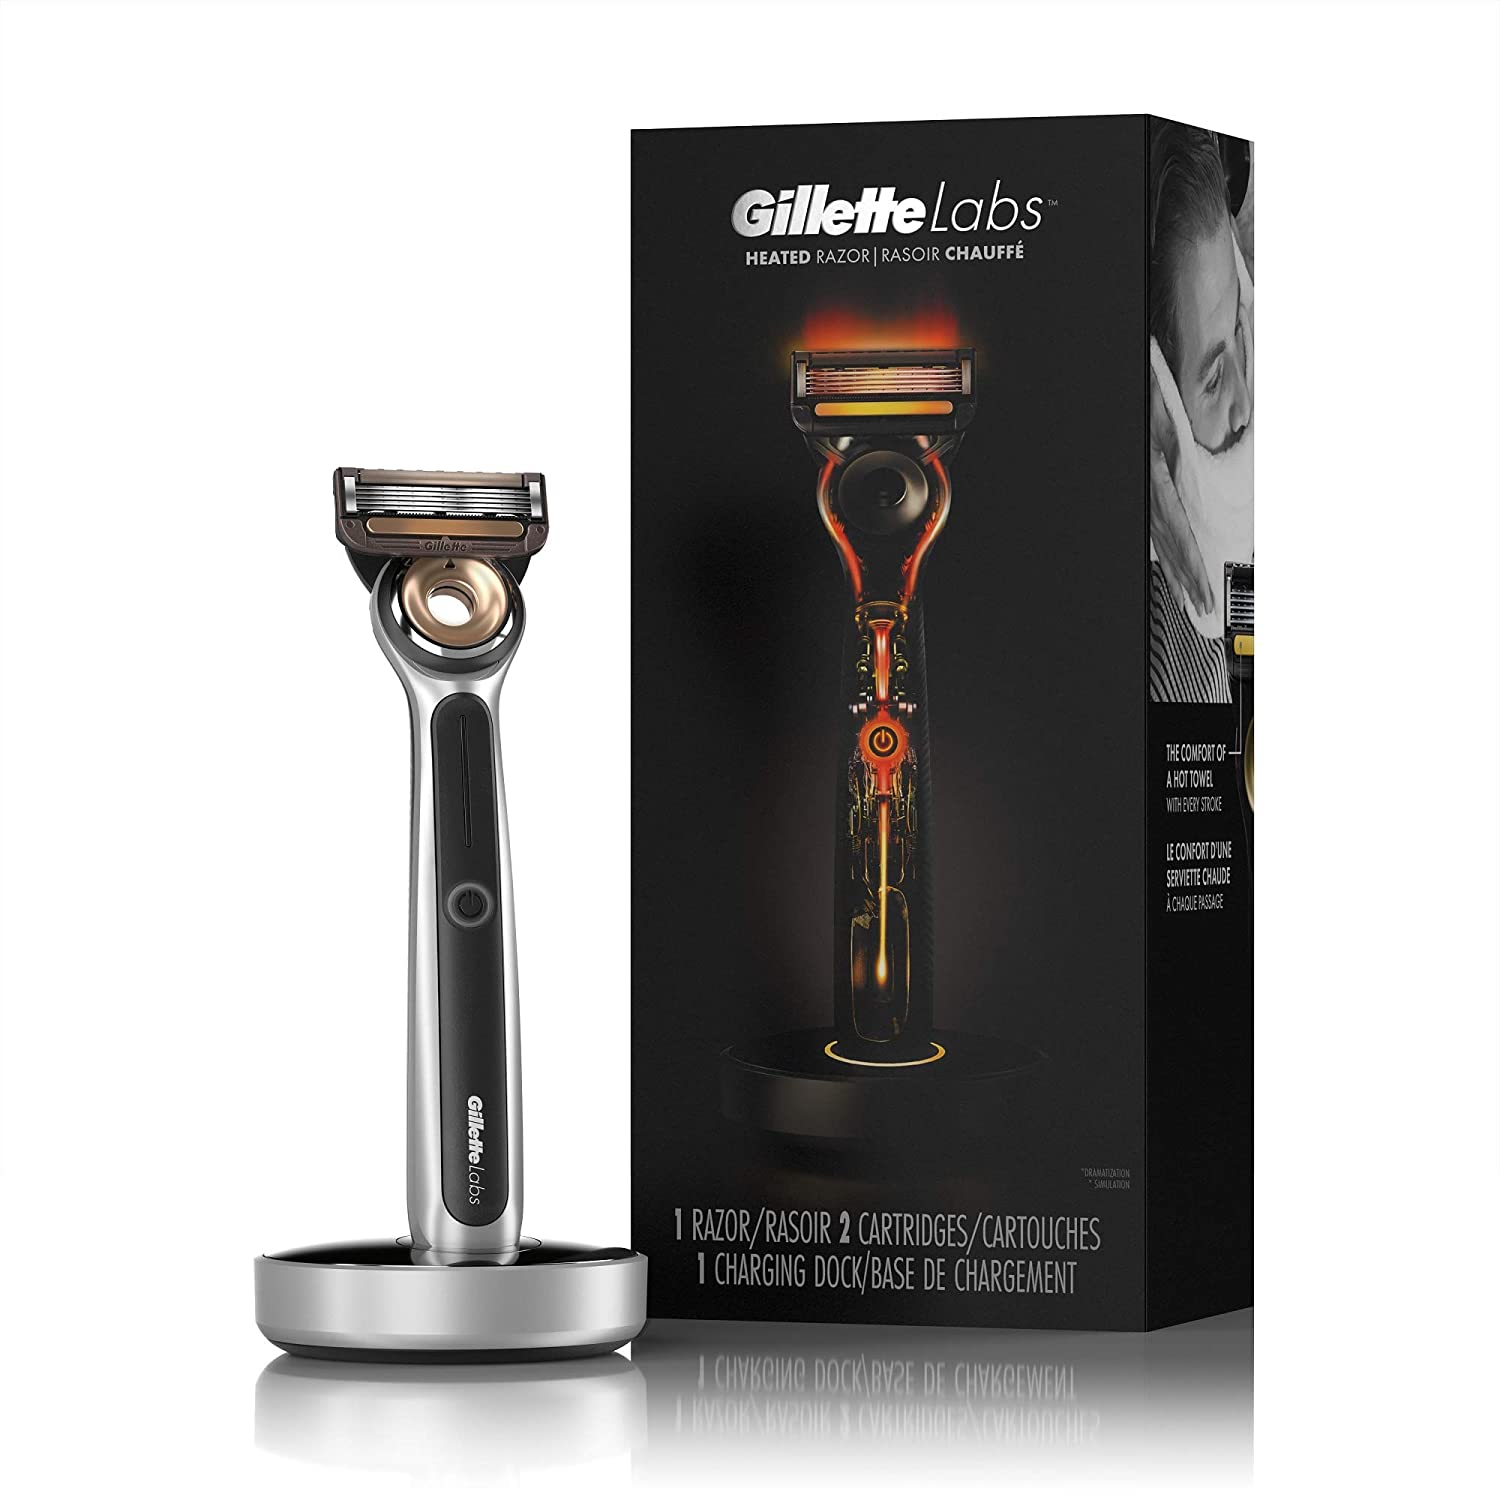 Gillette Labs Heated Razor (Holiday Gift Kit)